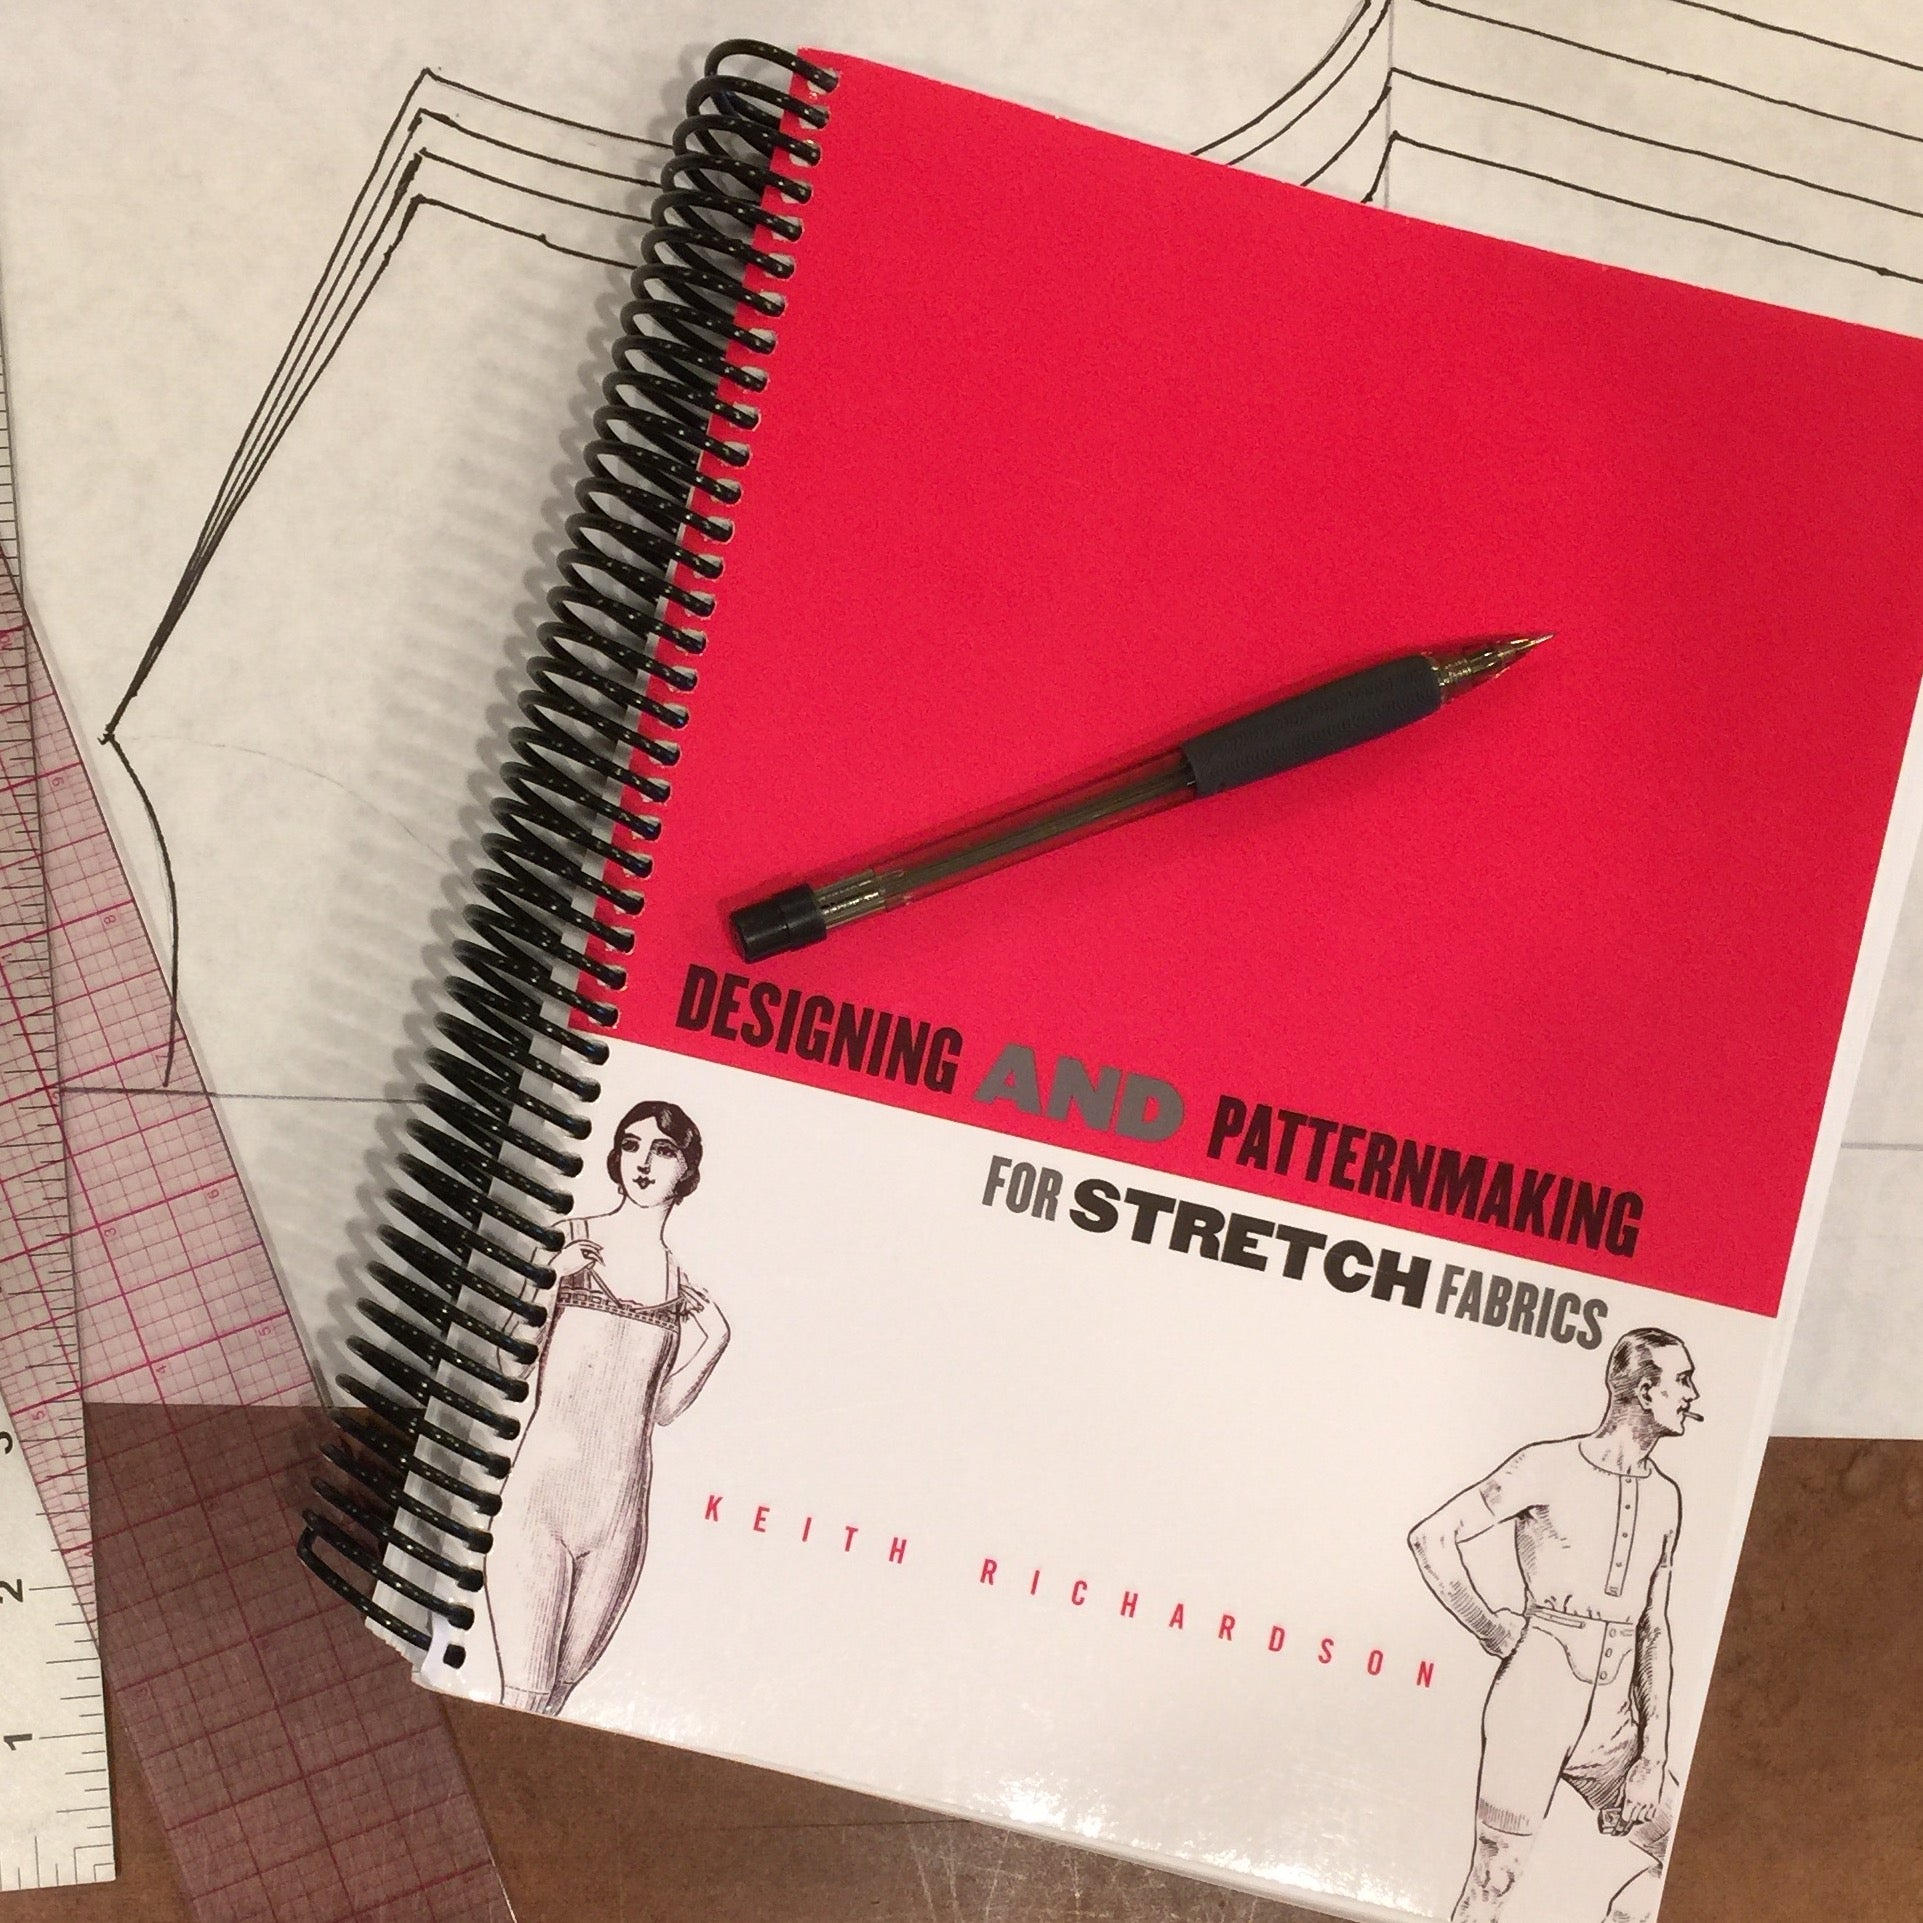 Book Review #2 - Designing and Patternmaking for Stretch Fabrics